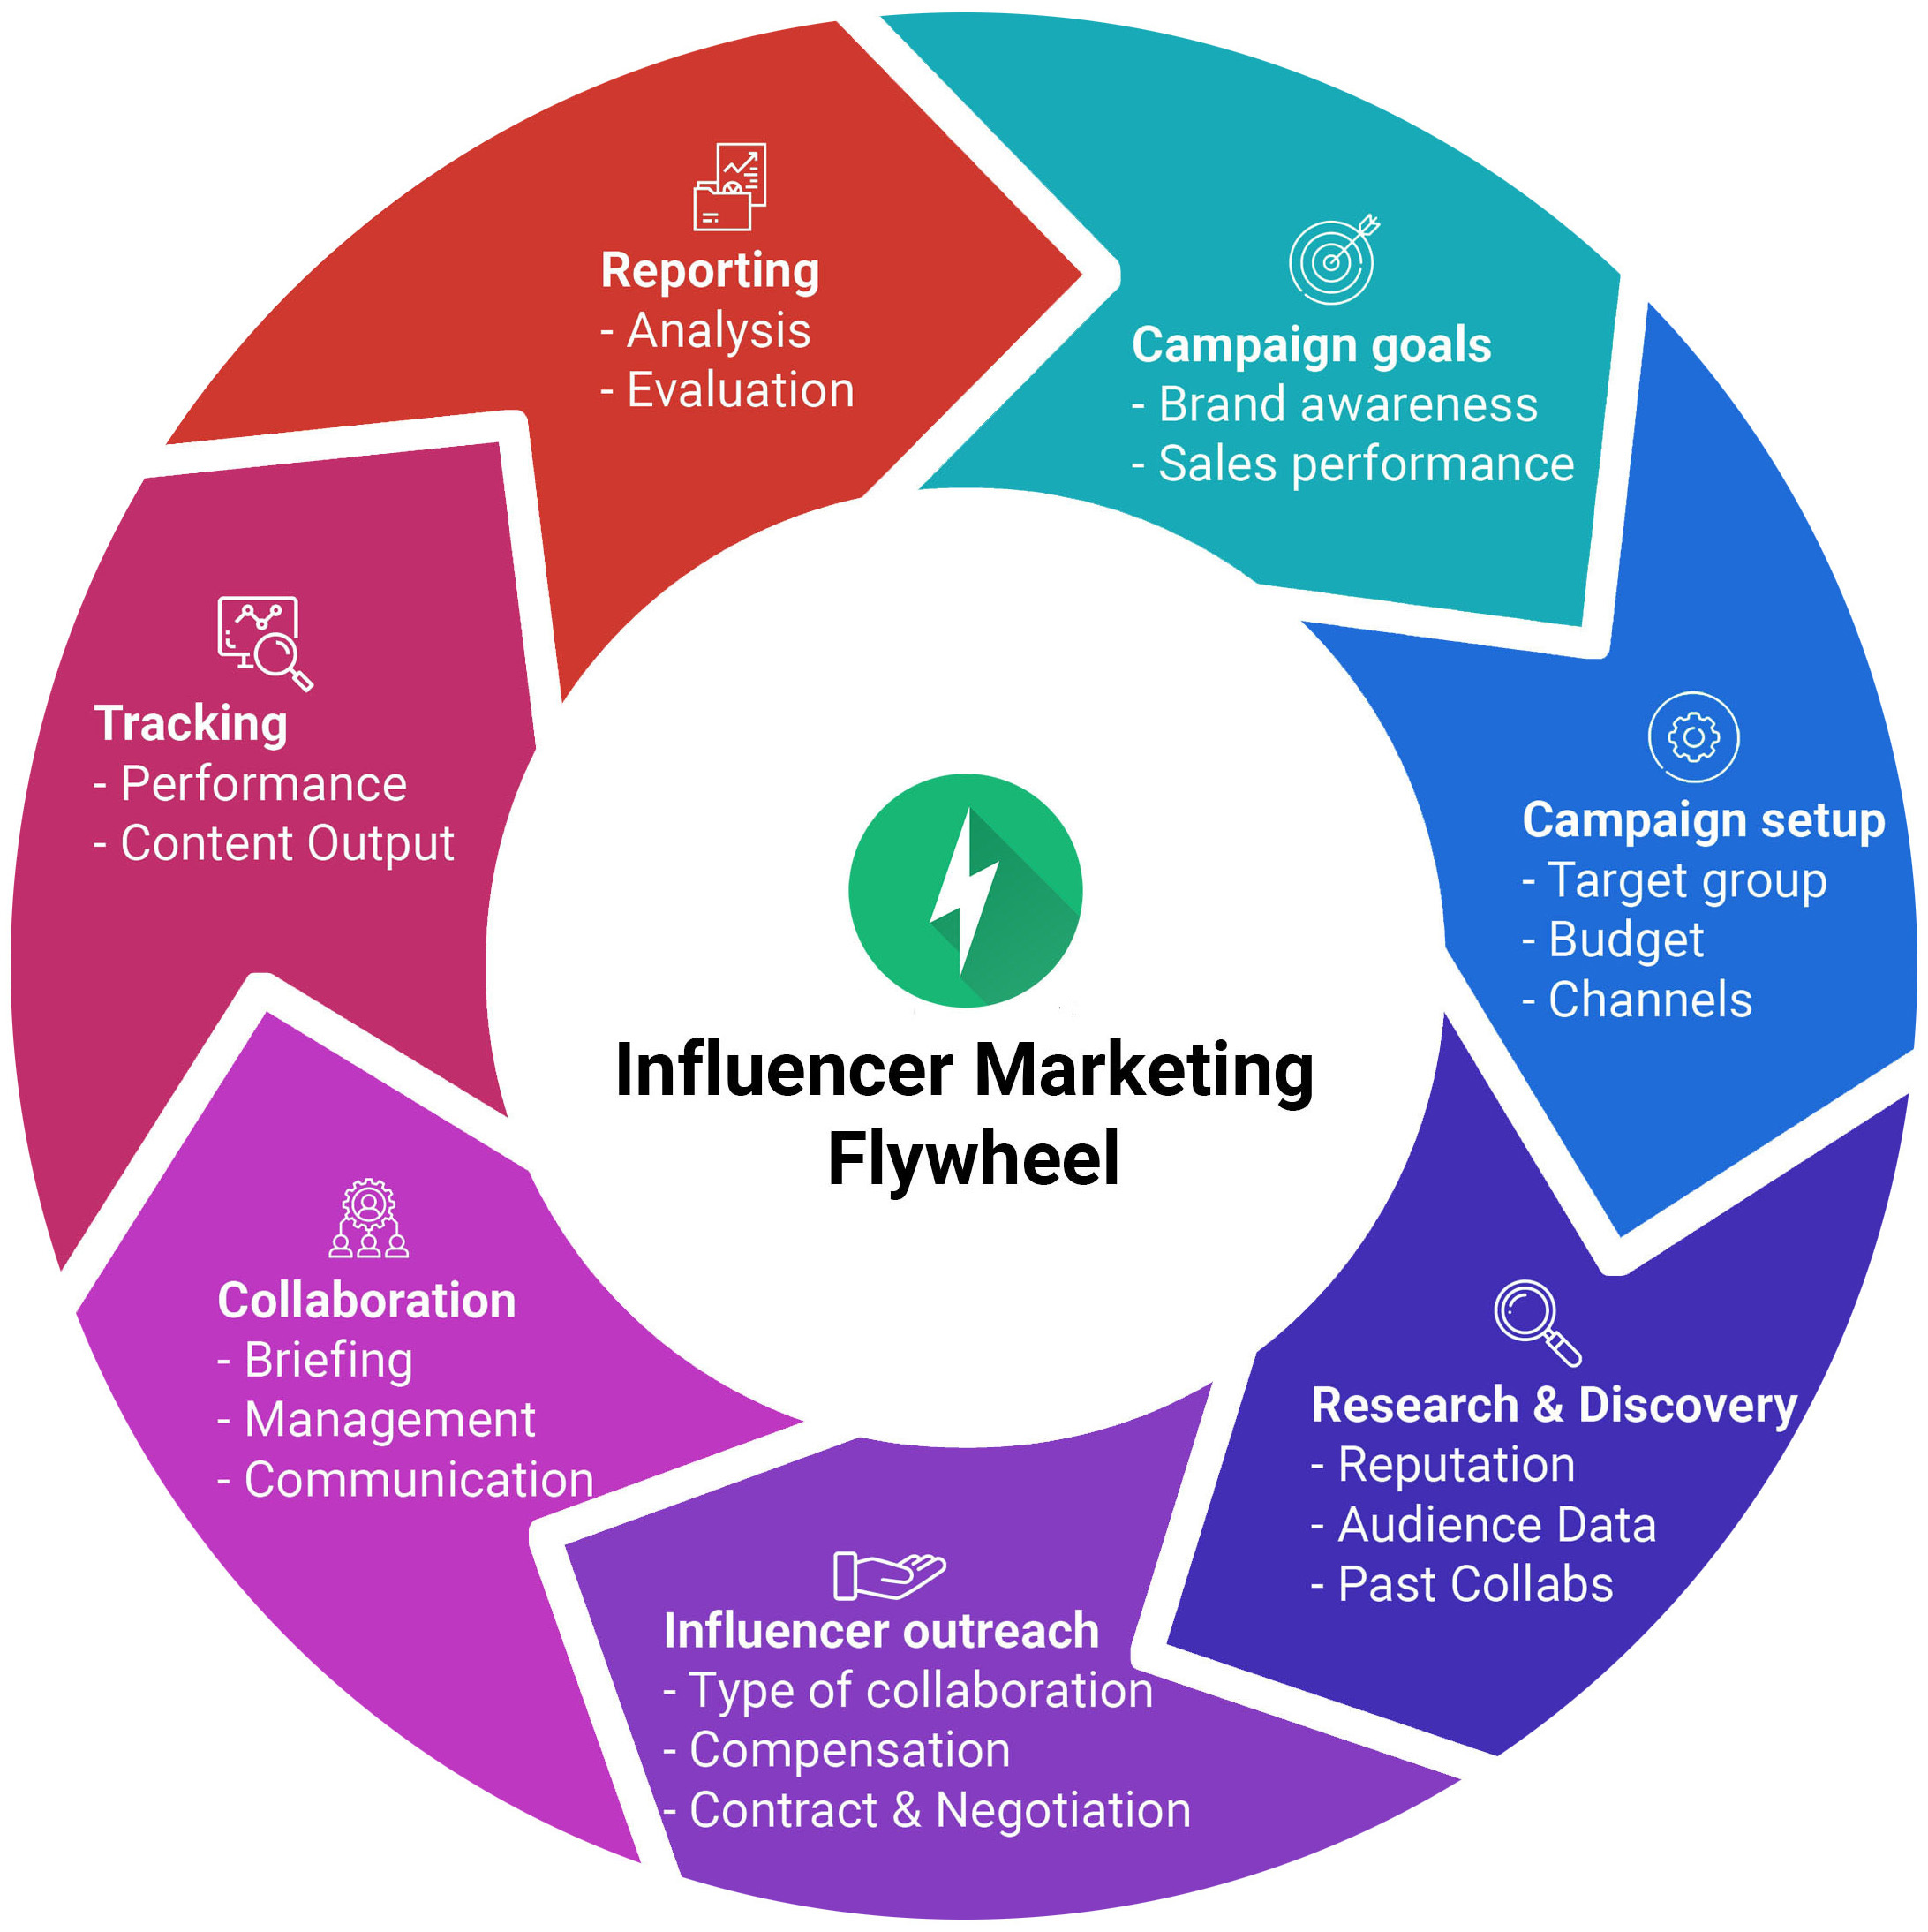 How to do Influencer Marketing: A Guide to Well-Planned Strategy